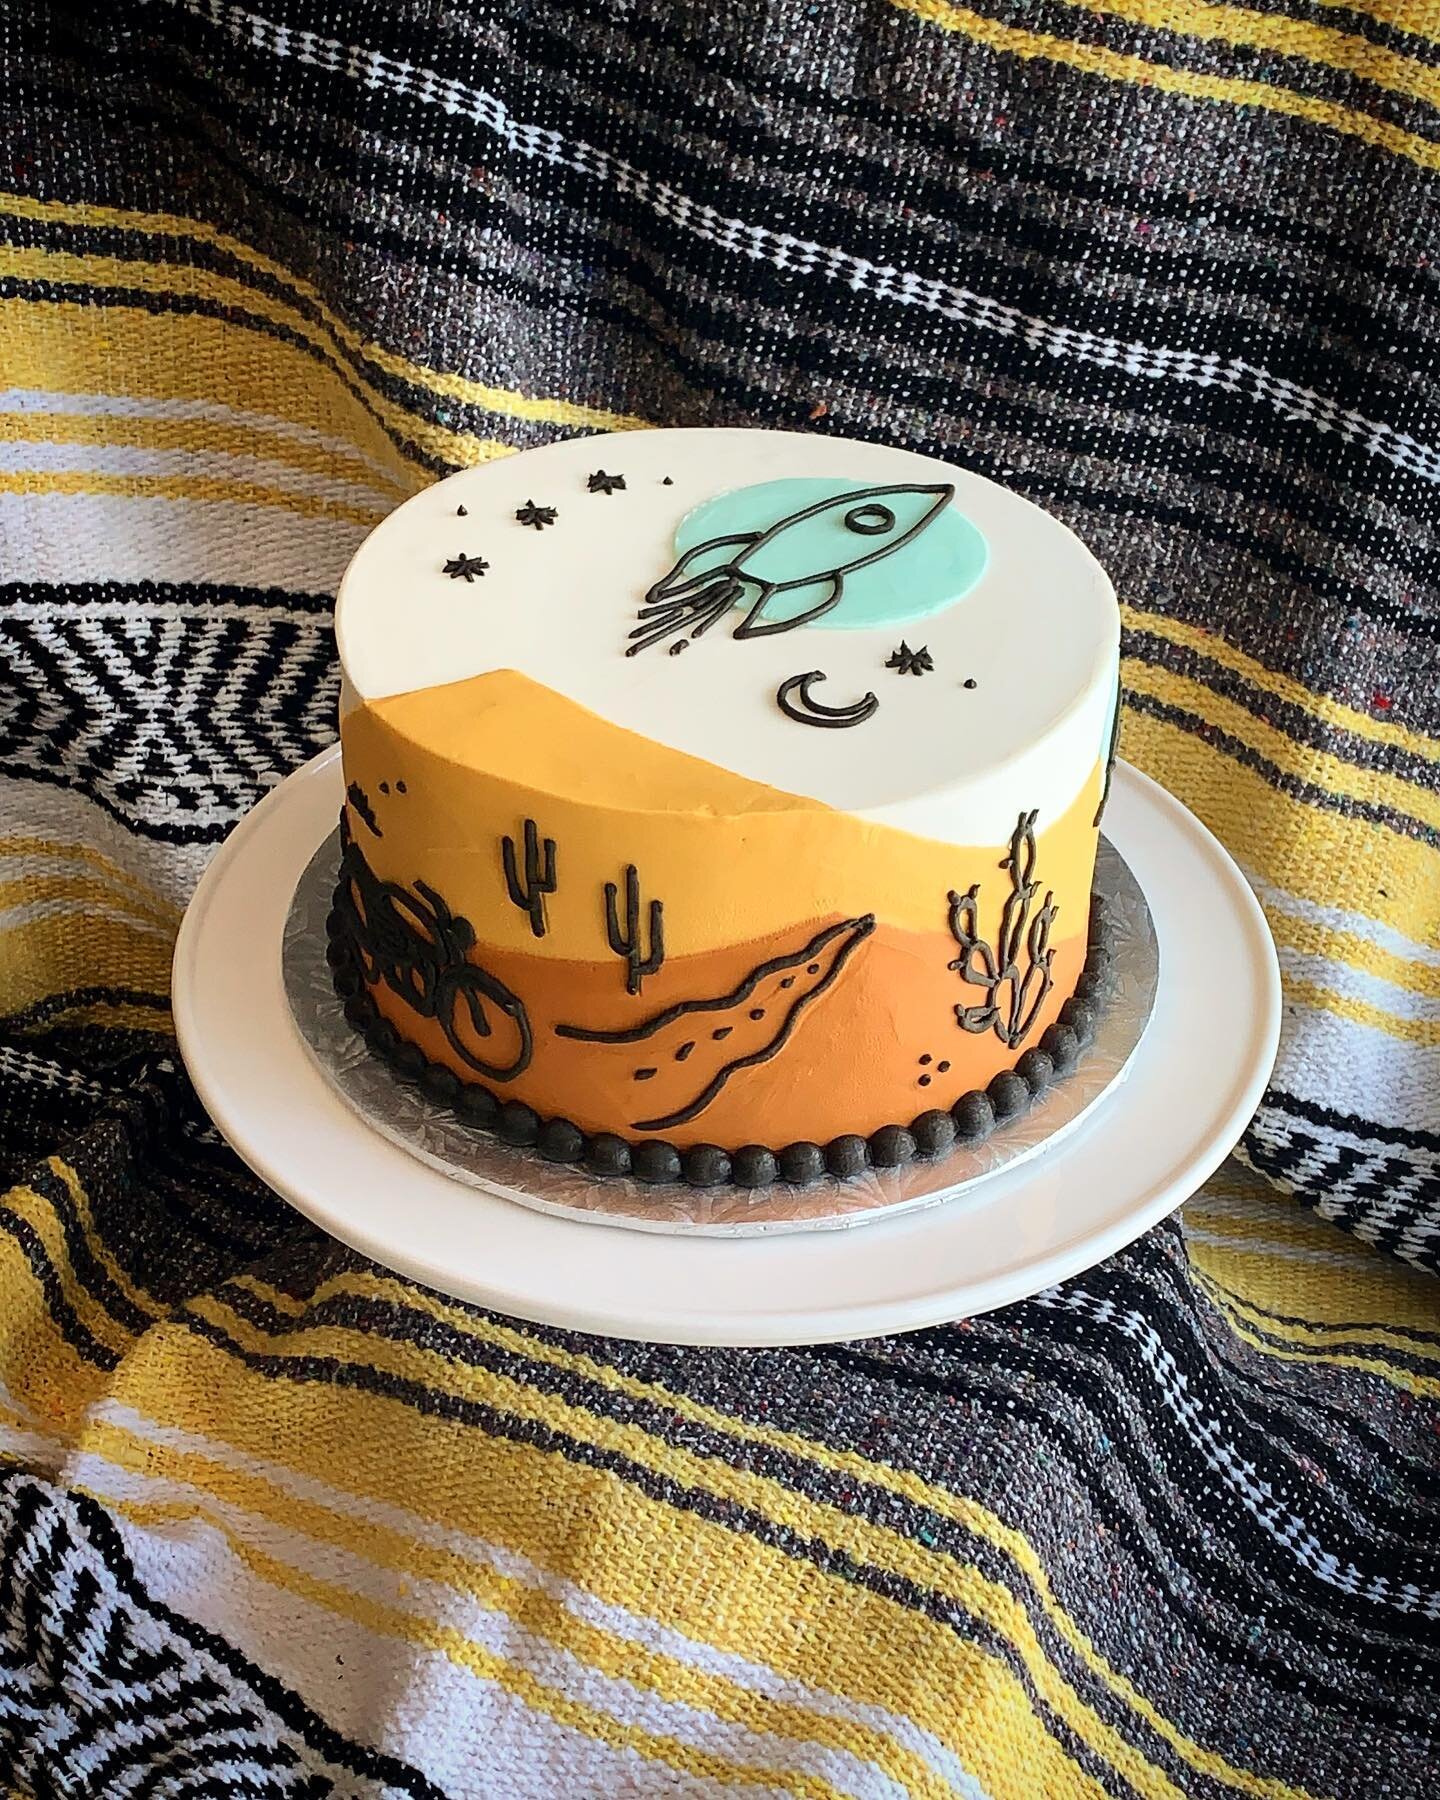 A double birthday cake for two of earth&rsquo;s coolest inhabitants @buildarocket13 &amp; @covecabin 💛🧡🤎

Citrus cardamom cake with buttercream filling and decoration. A forgery on the theme of artist @prescottmccarthy &lsquo;s beautiful water tow